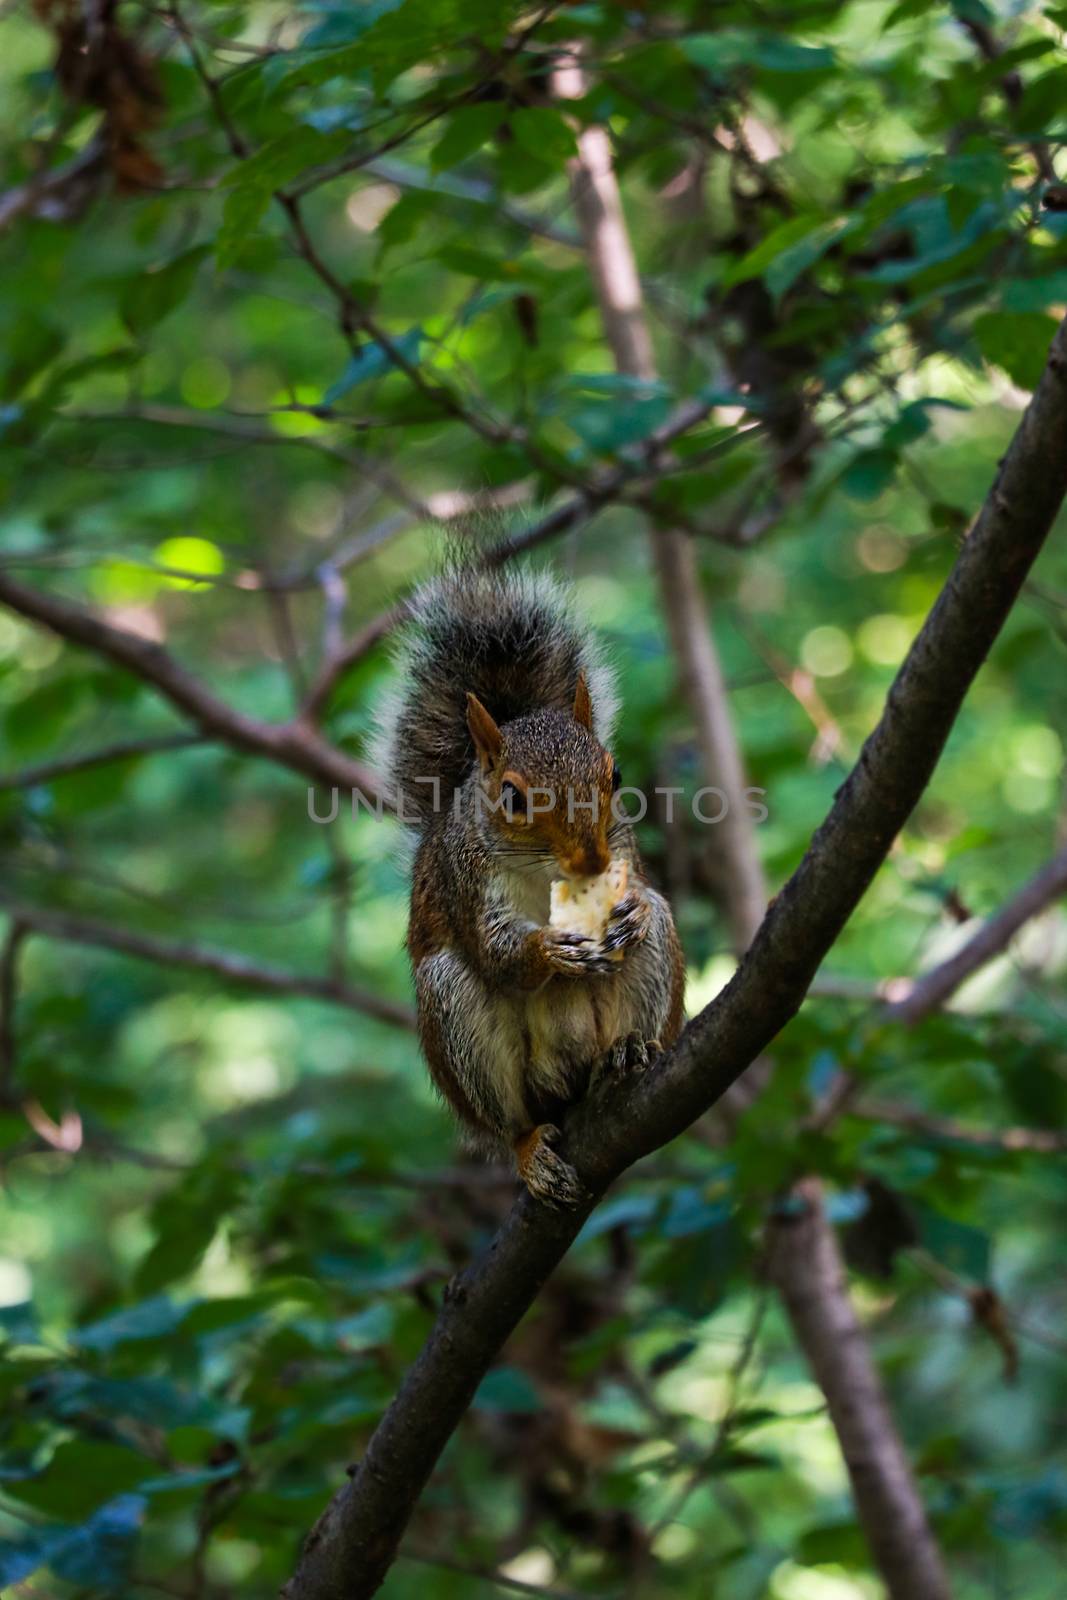 The little squirrel feasting high up in a tree. by kip02kas